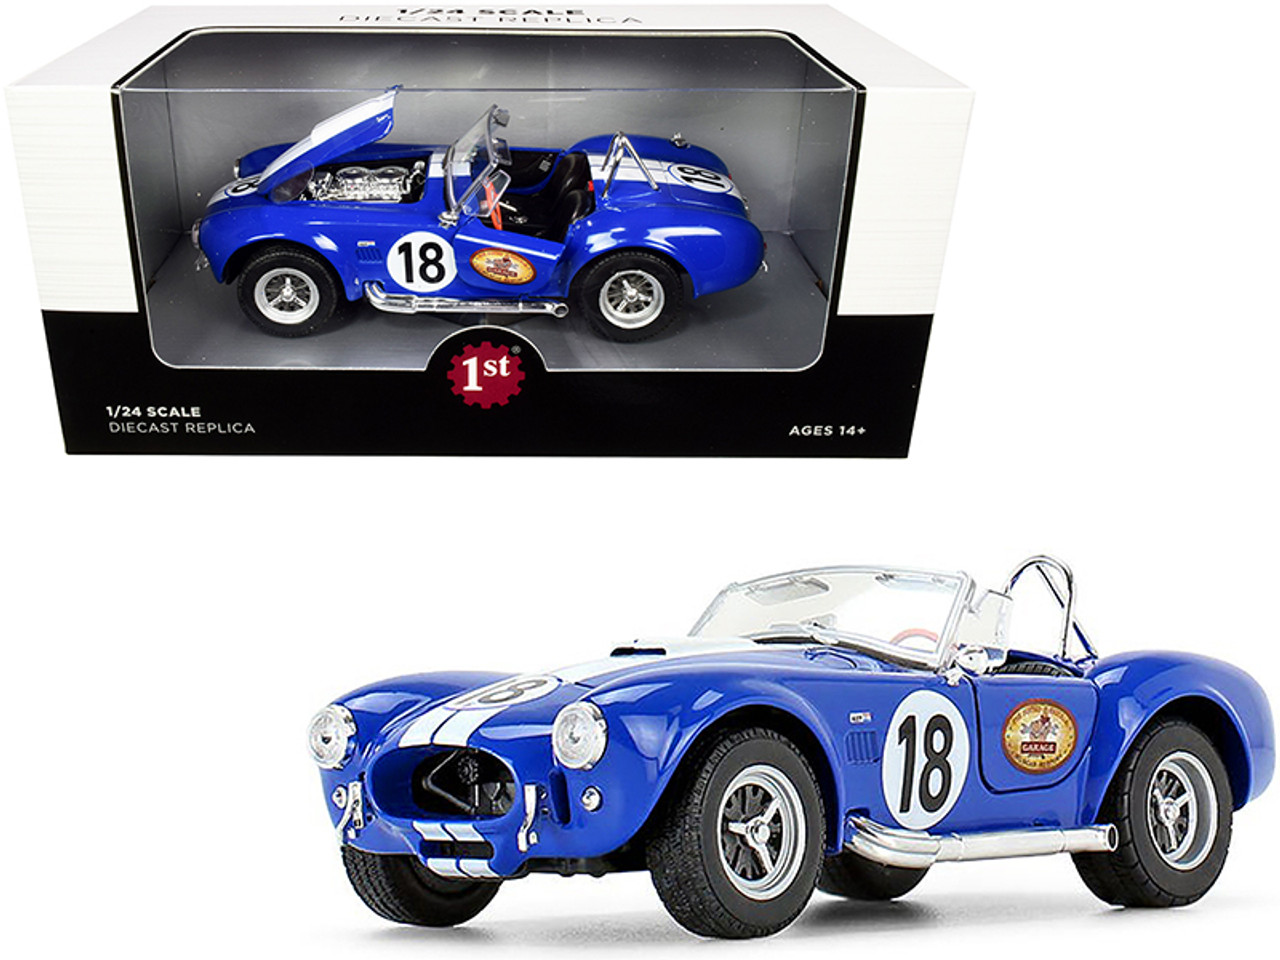 Shelby Cobra 427 S/C #18 Blue with White Stripes "The Busted Knuckle Garage" 1/24 Diecast Model Car by First Gear